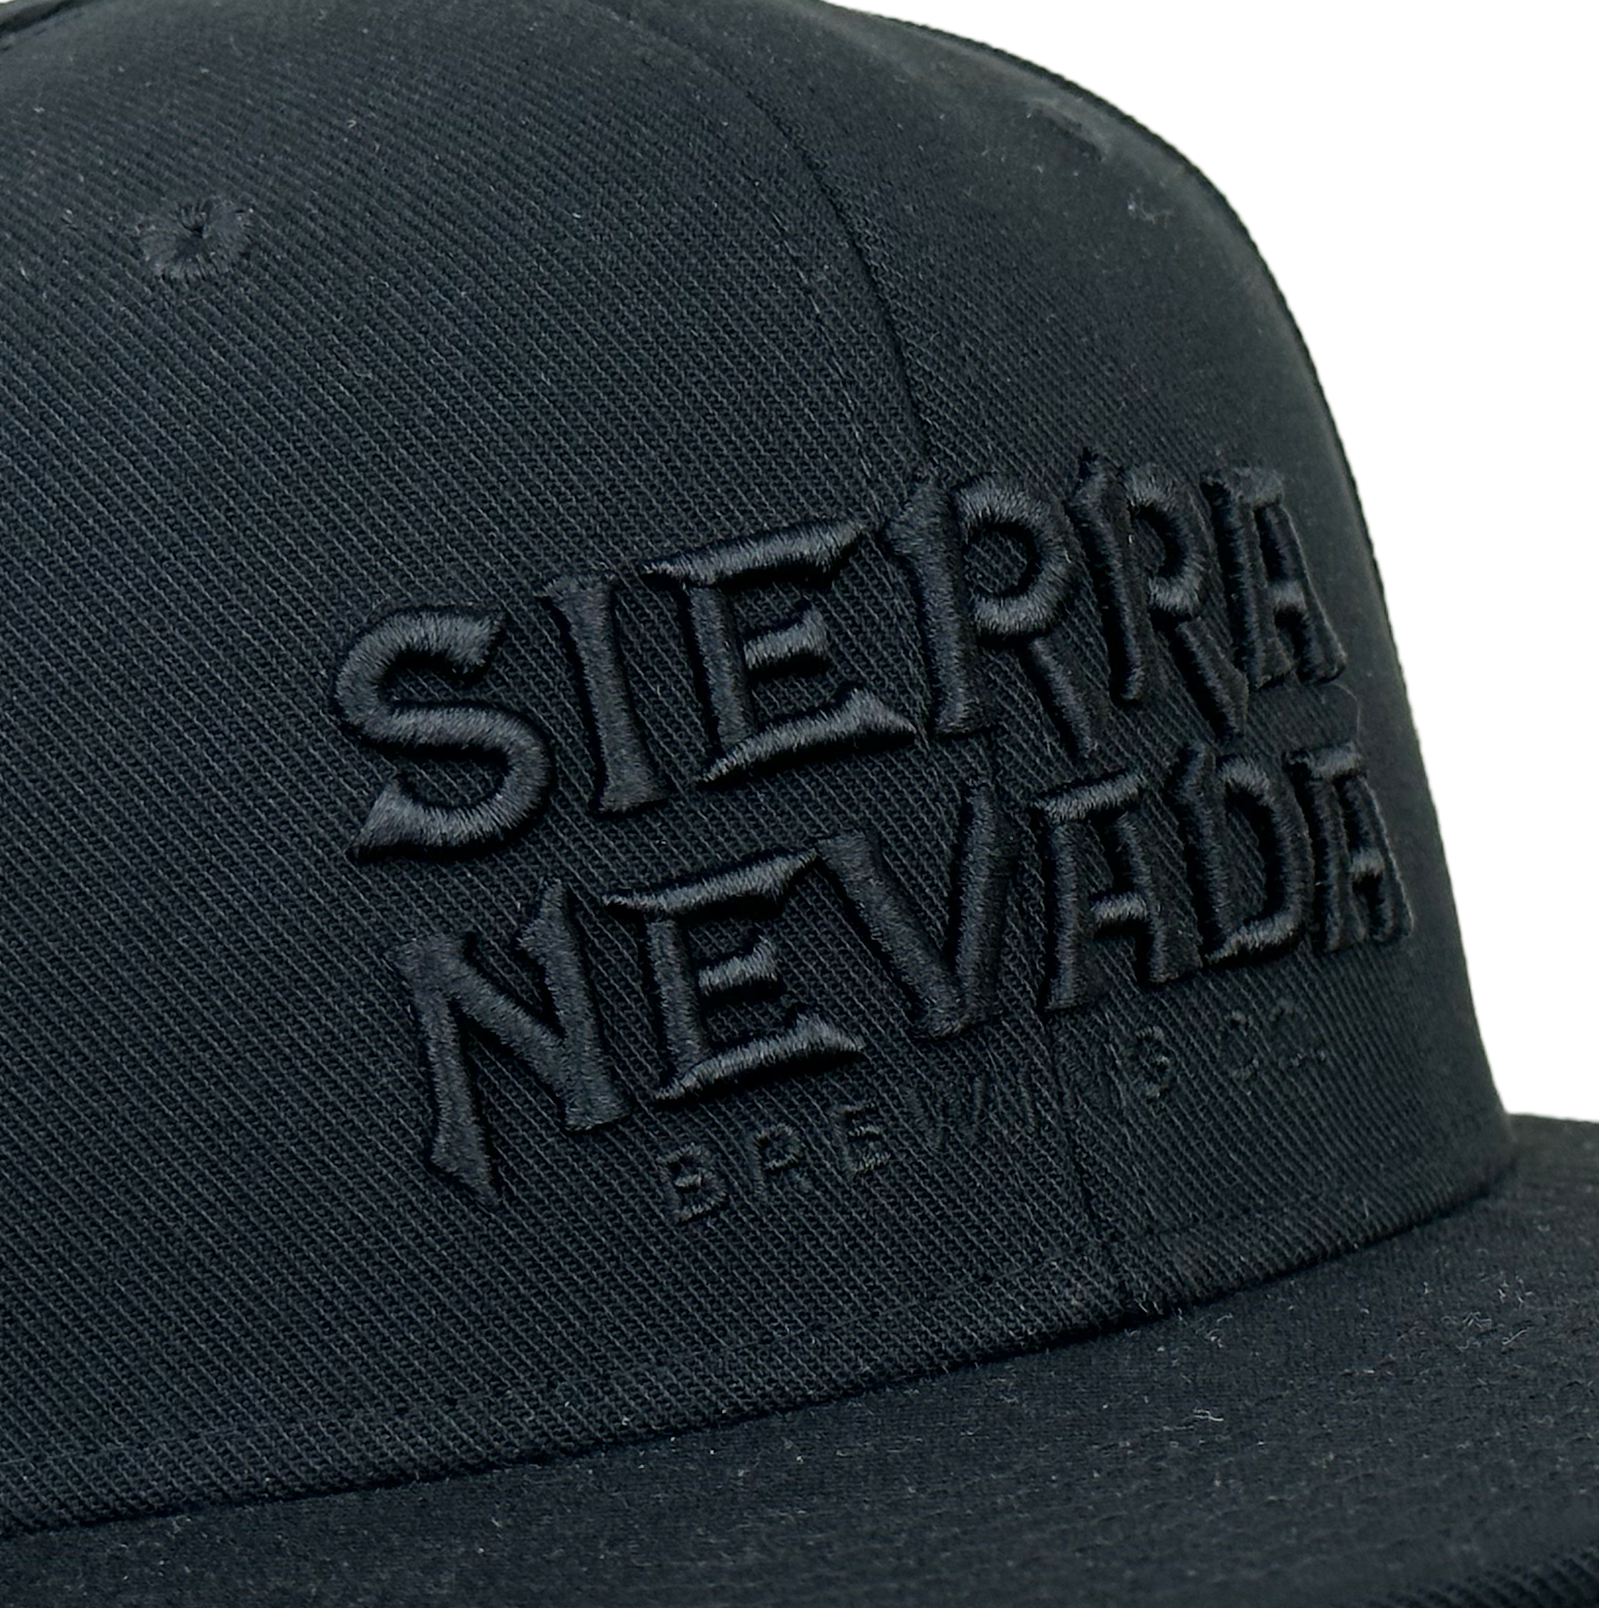 Sierra Nevada Stacked Text Hat Black - closeup shot of the embroidered text logo on the front of the hat